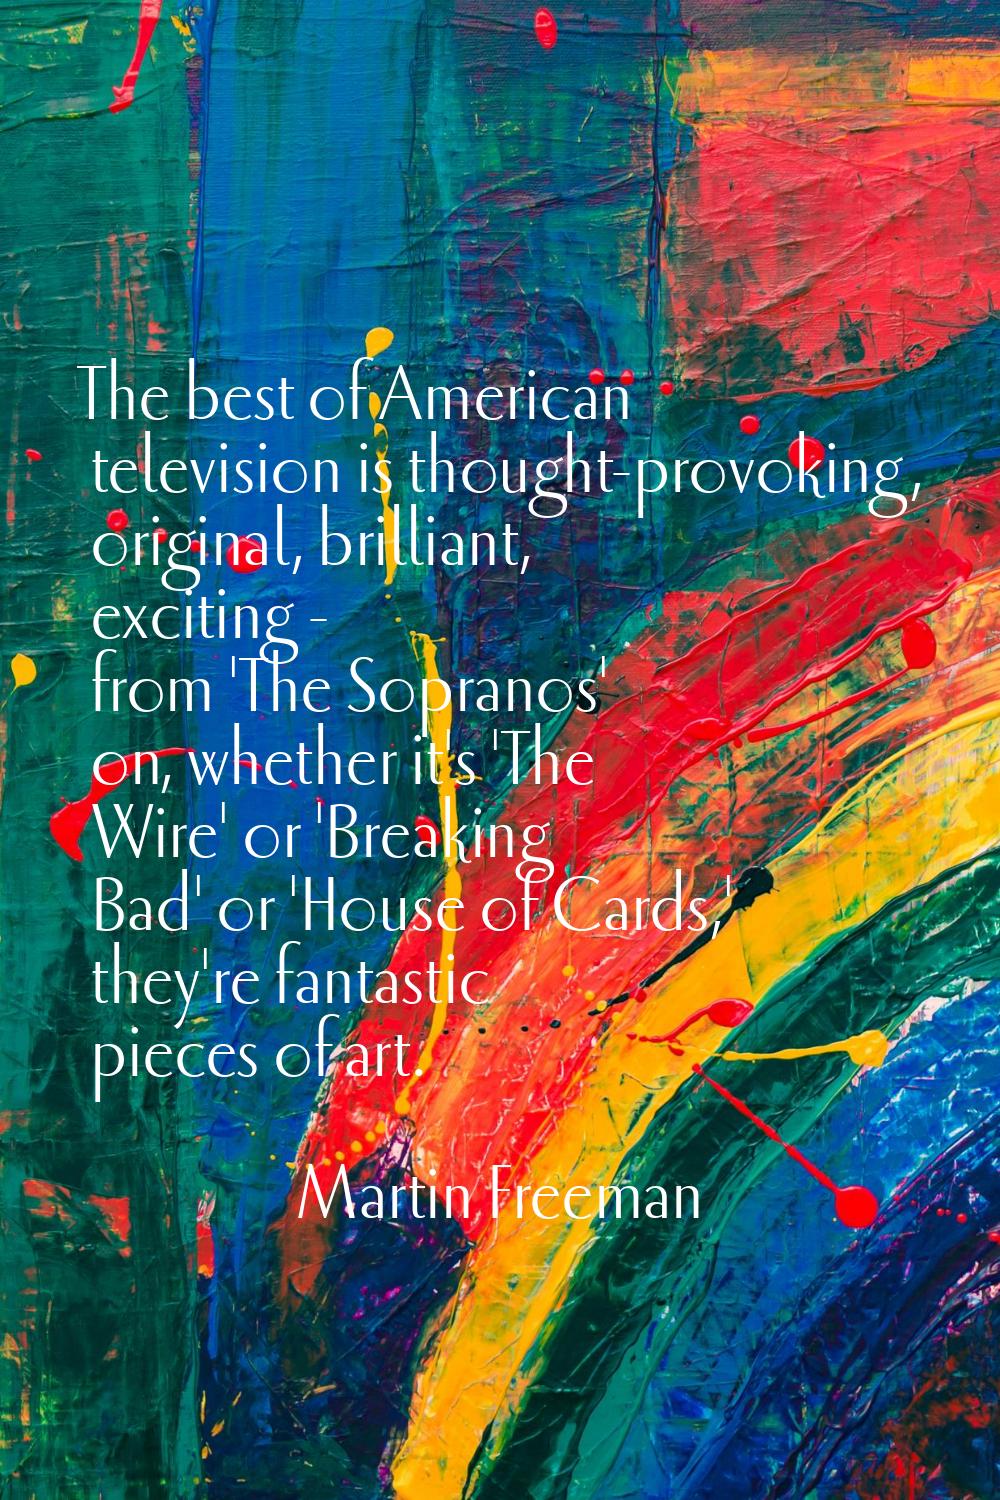 The best of American television is thought-provoking, original, brilliant, exciting - from 'The Sop